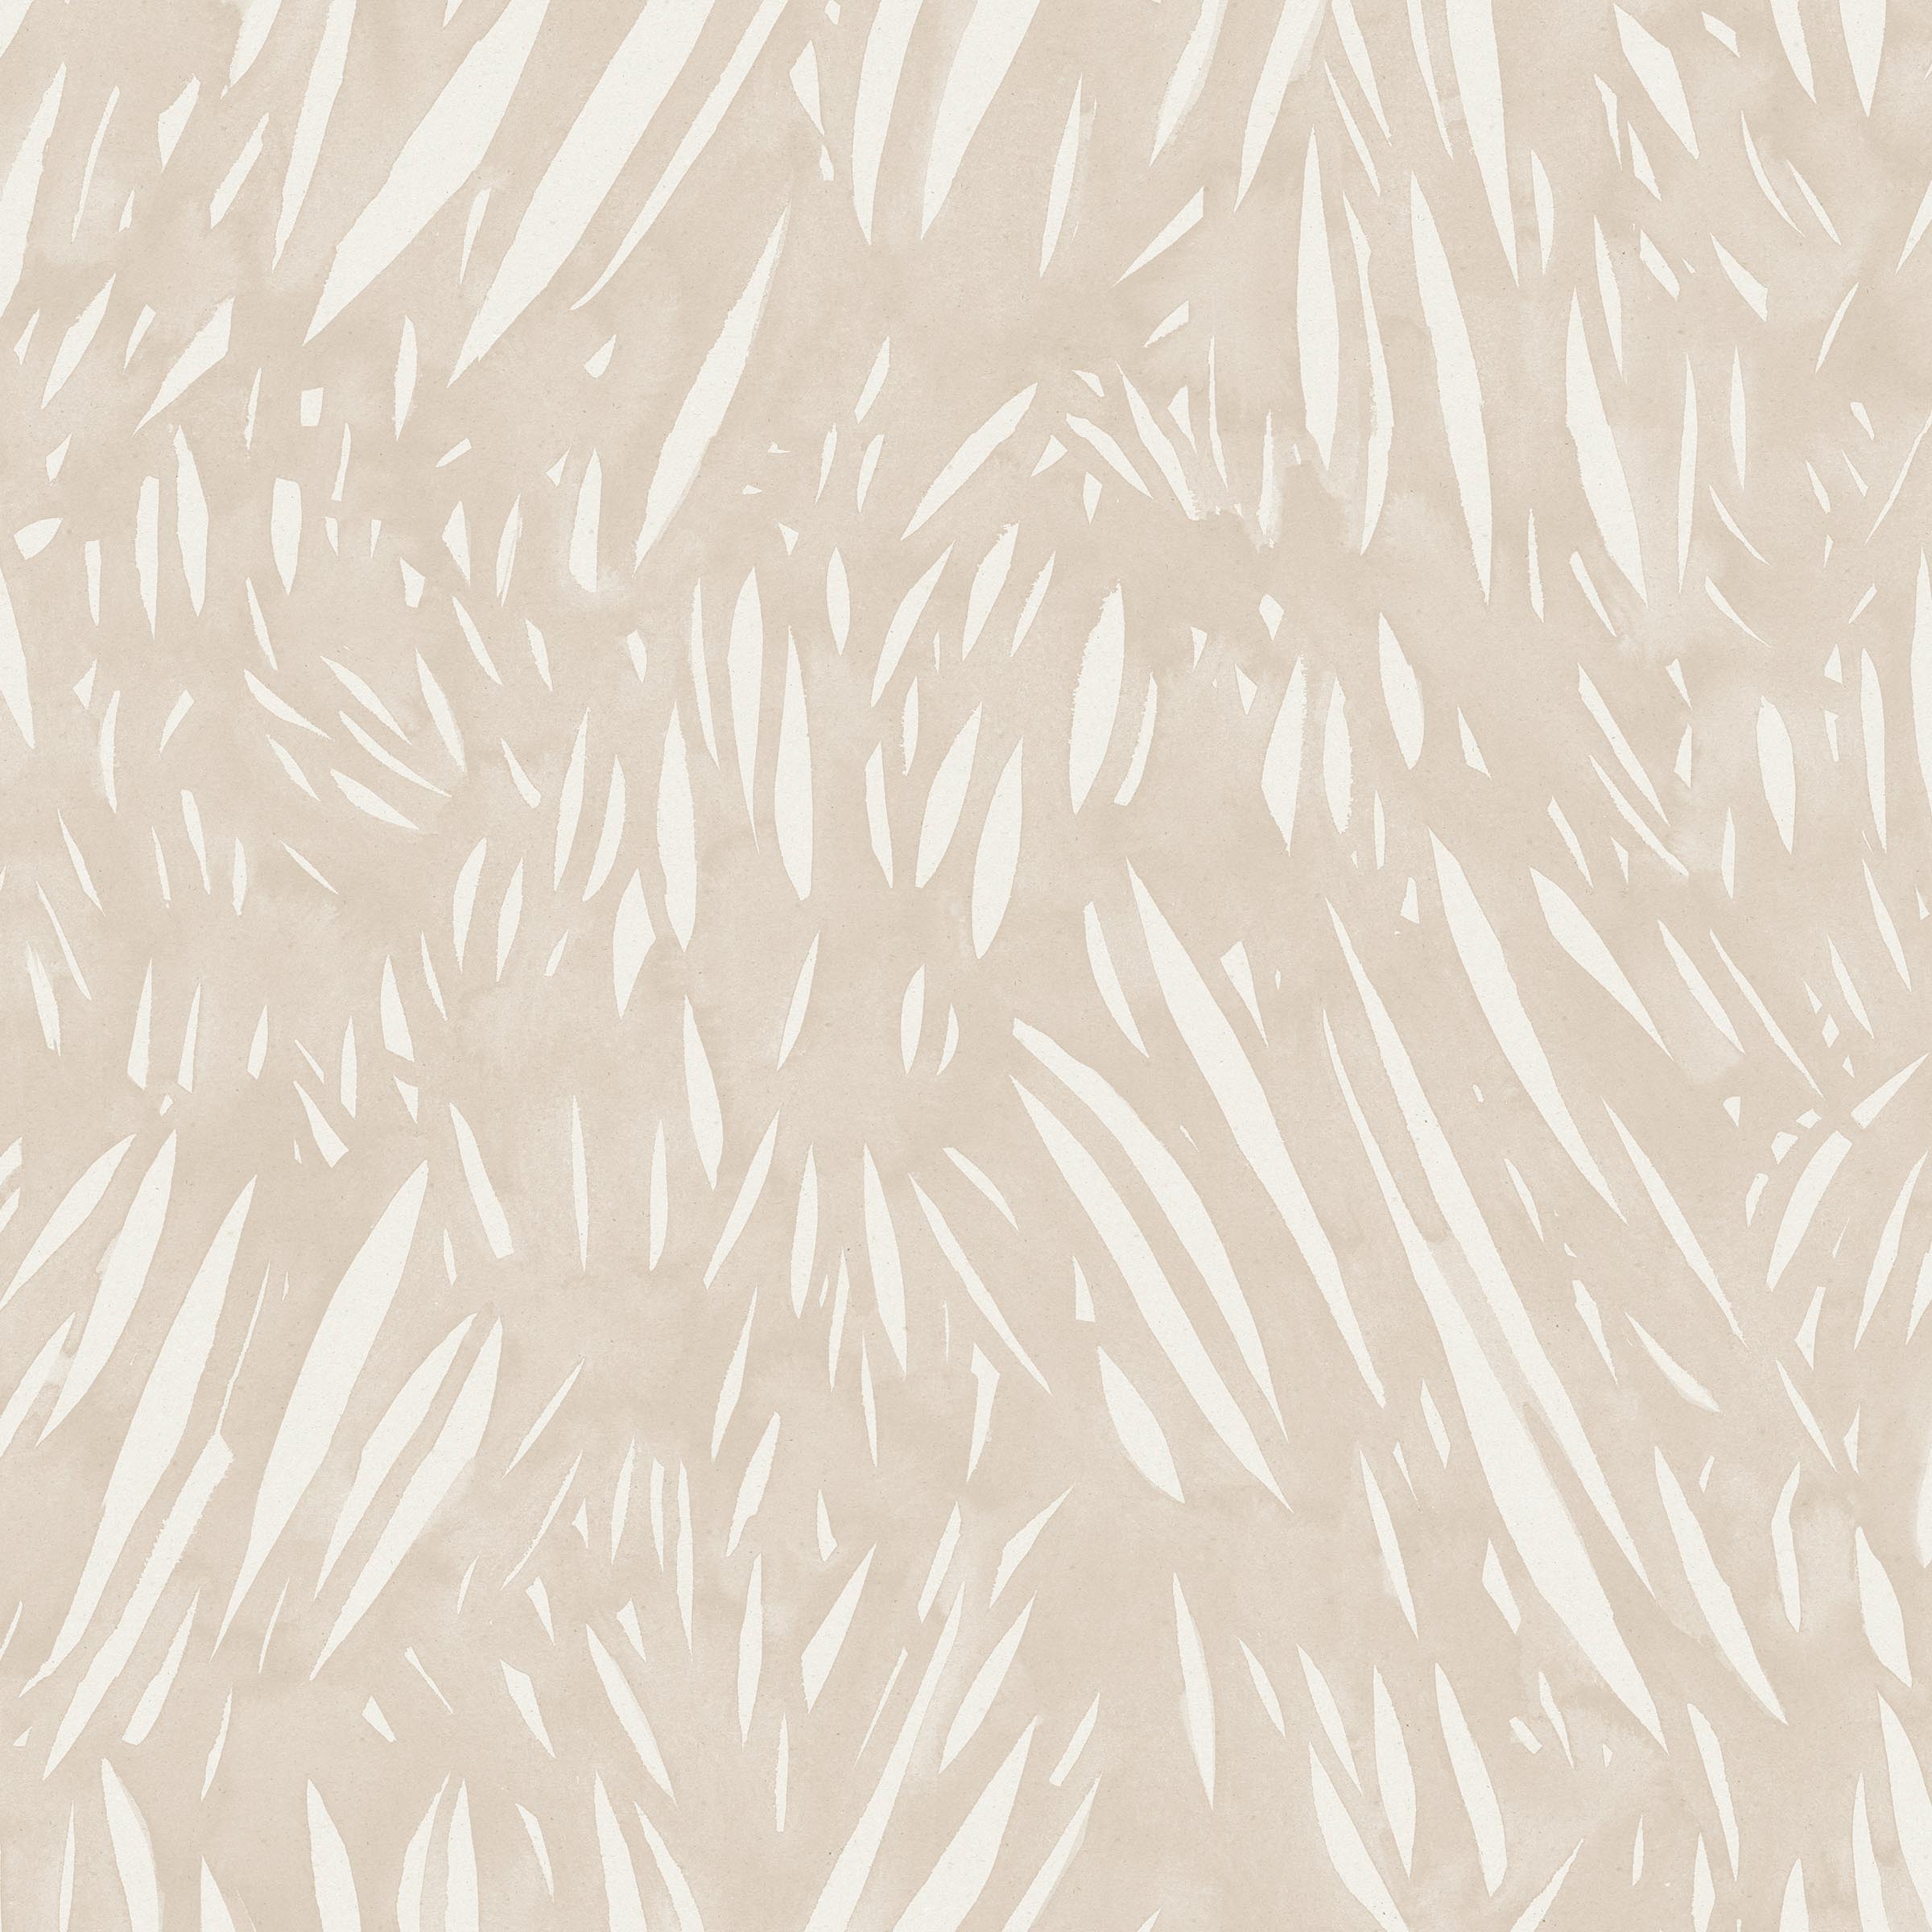 Detail of fabric in an abstract leaf pattern in white on a cream watercolor field.